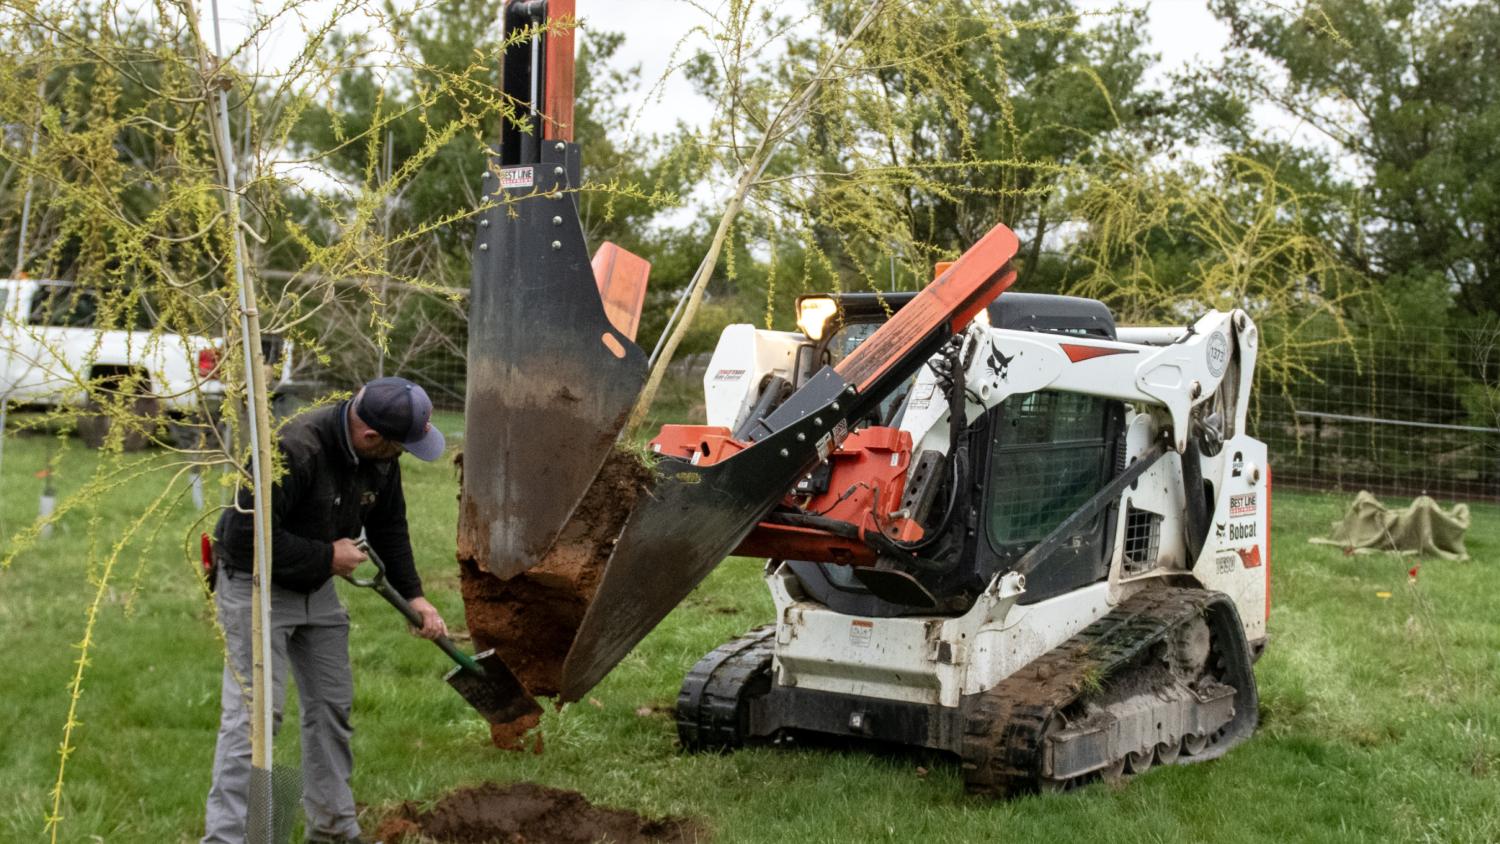 Workers dig a small tree in preparation for replanting.